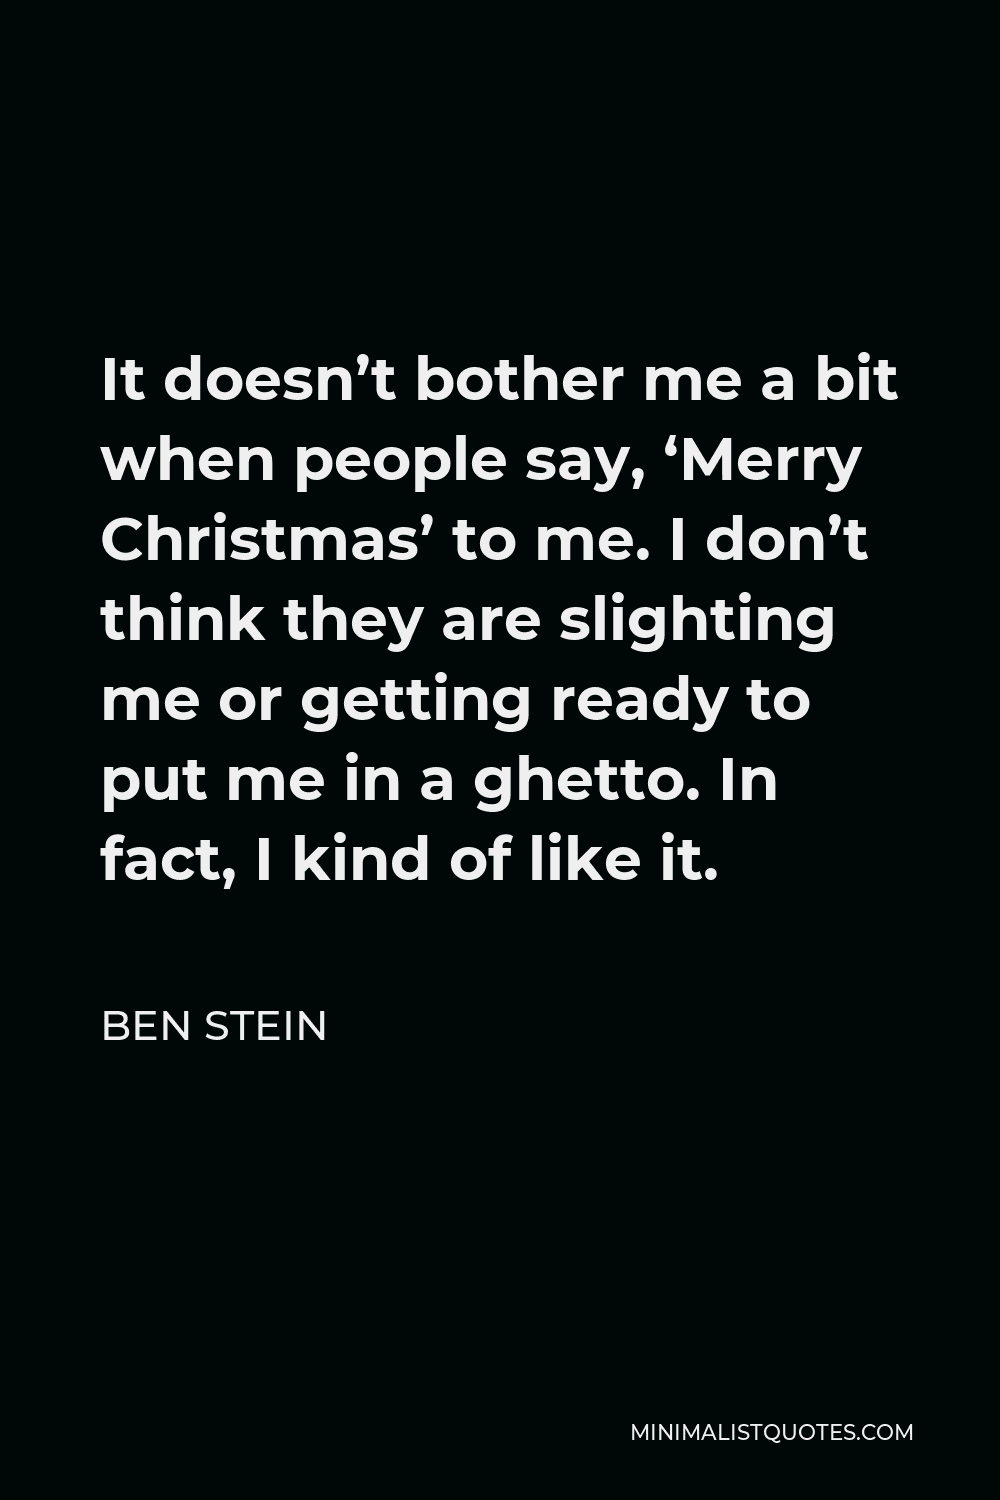 Ben Stein Quote - It doesn’t bother me a bit when people say, ‘Merry Christmas’ to me. I don’t think they are slighting me or getting ready to put me in a ghetto. In fact, I kind of like it.